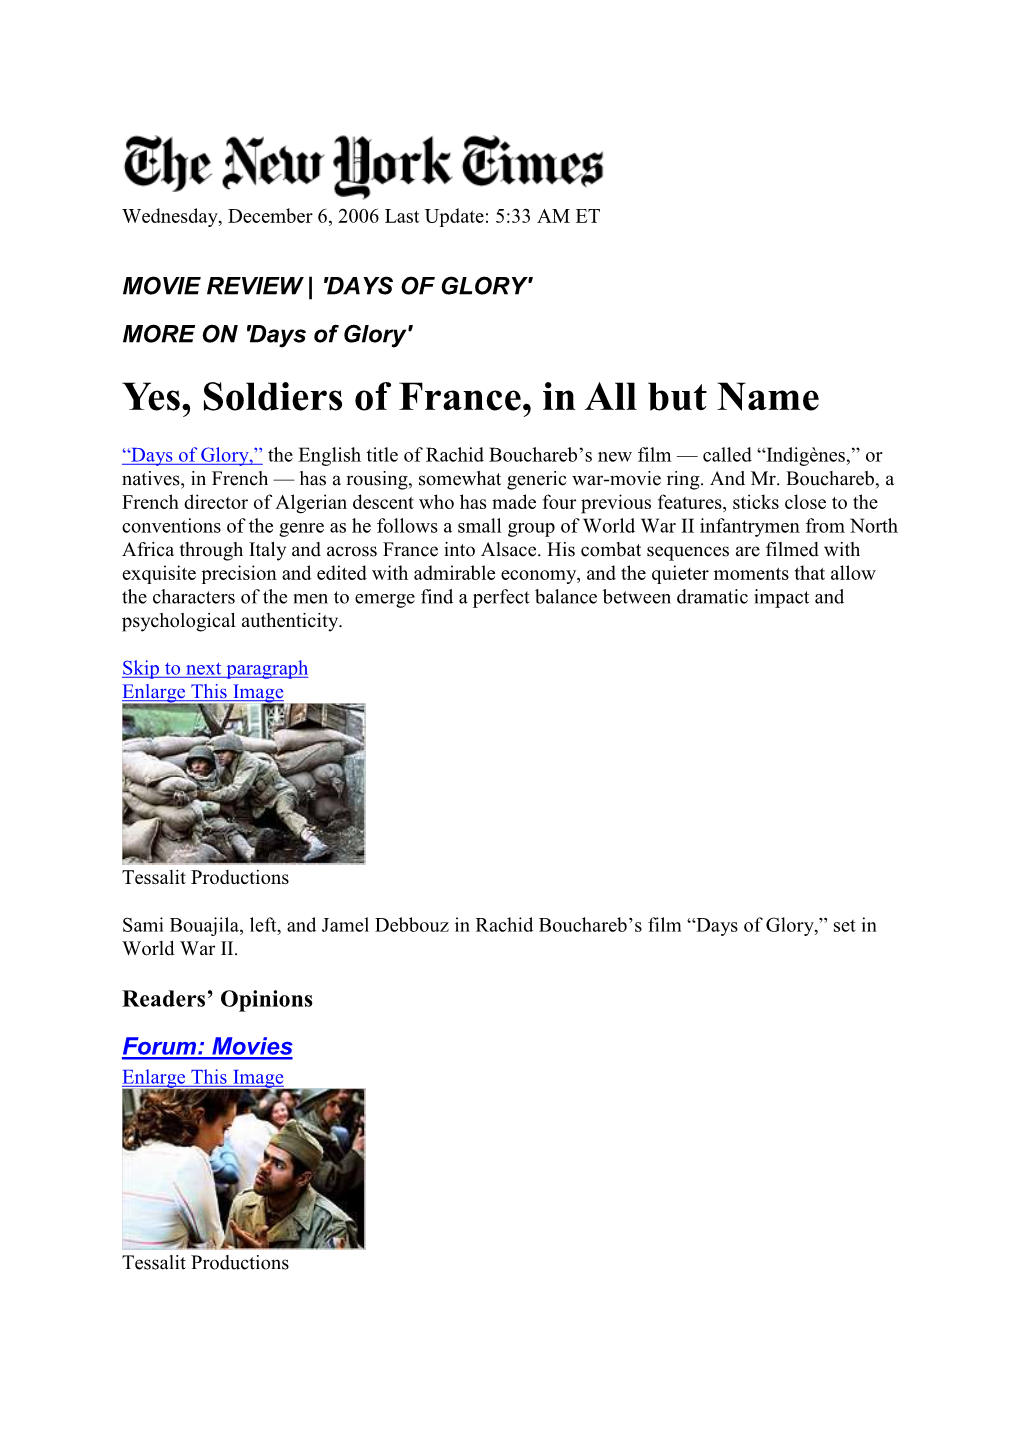 Yes, Soldiers of France, in All but Name